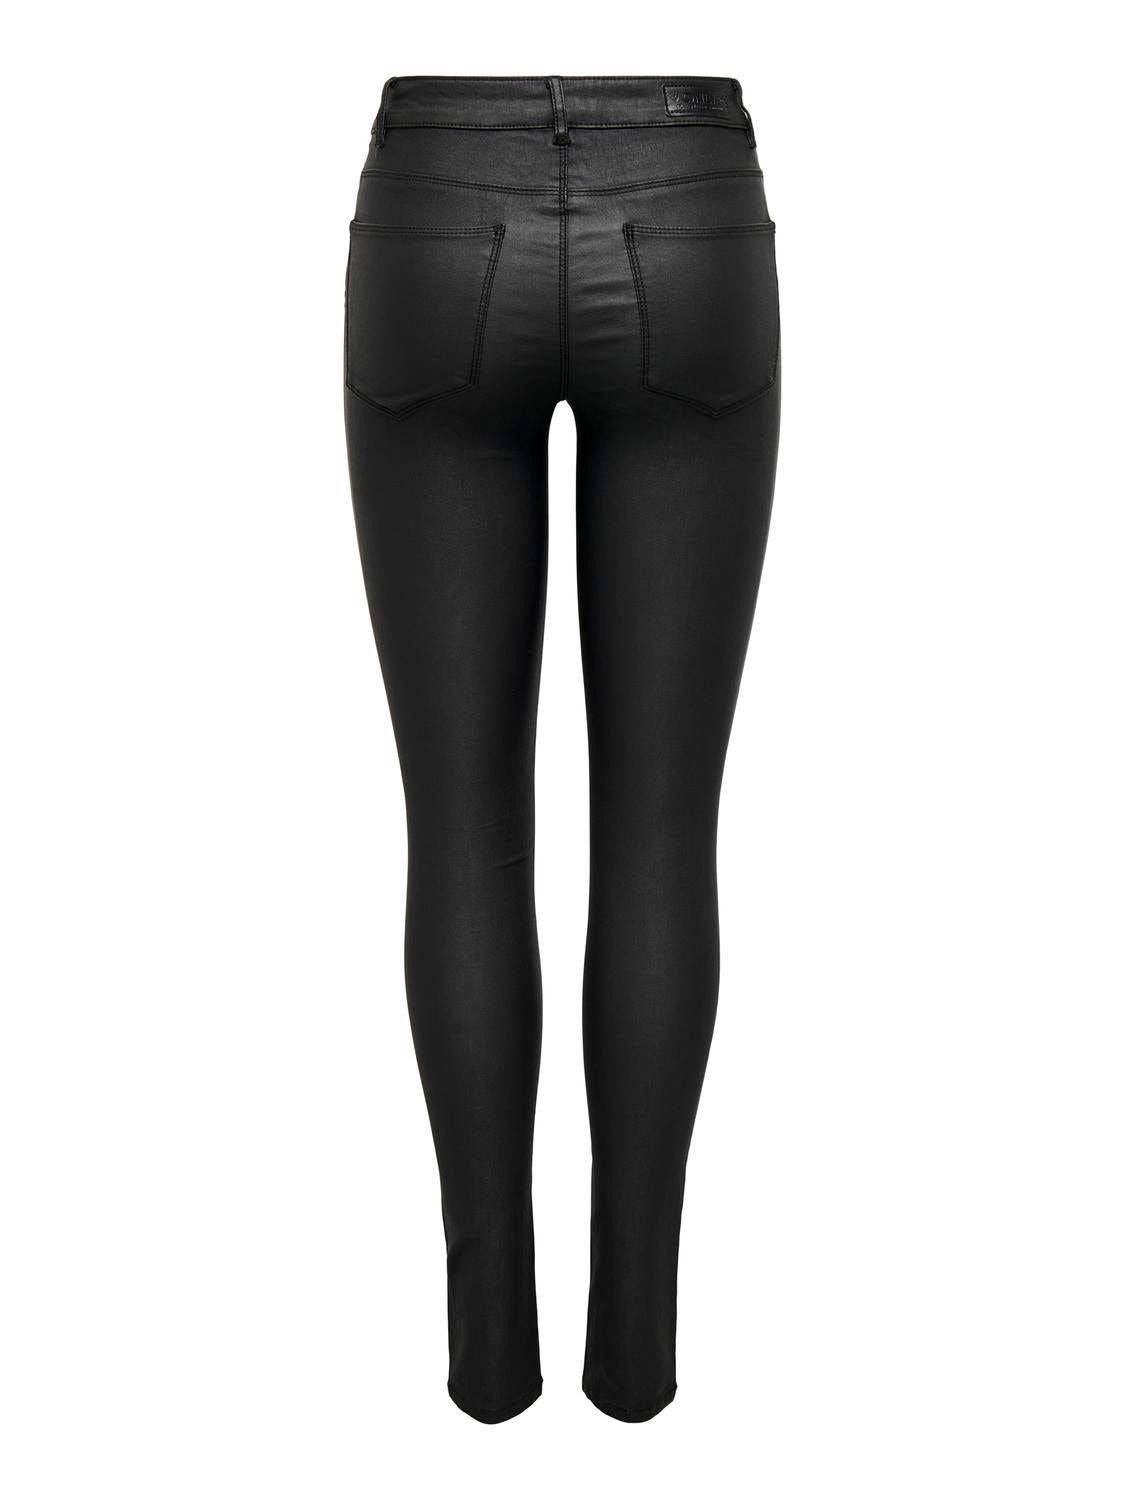 ONLY Skinny Fit Mittlere Taille Hose -Black - 15151791